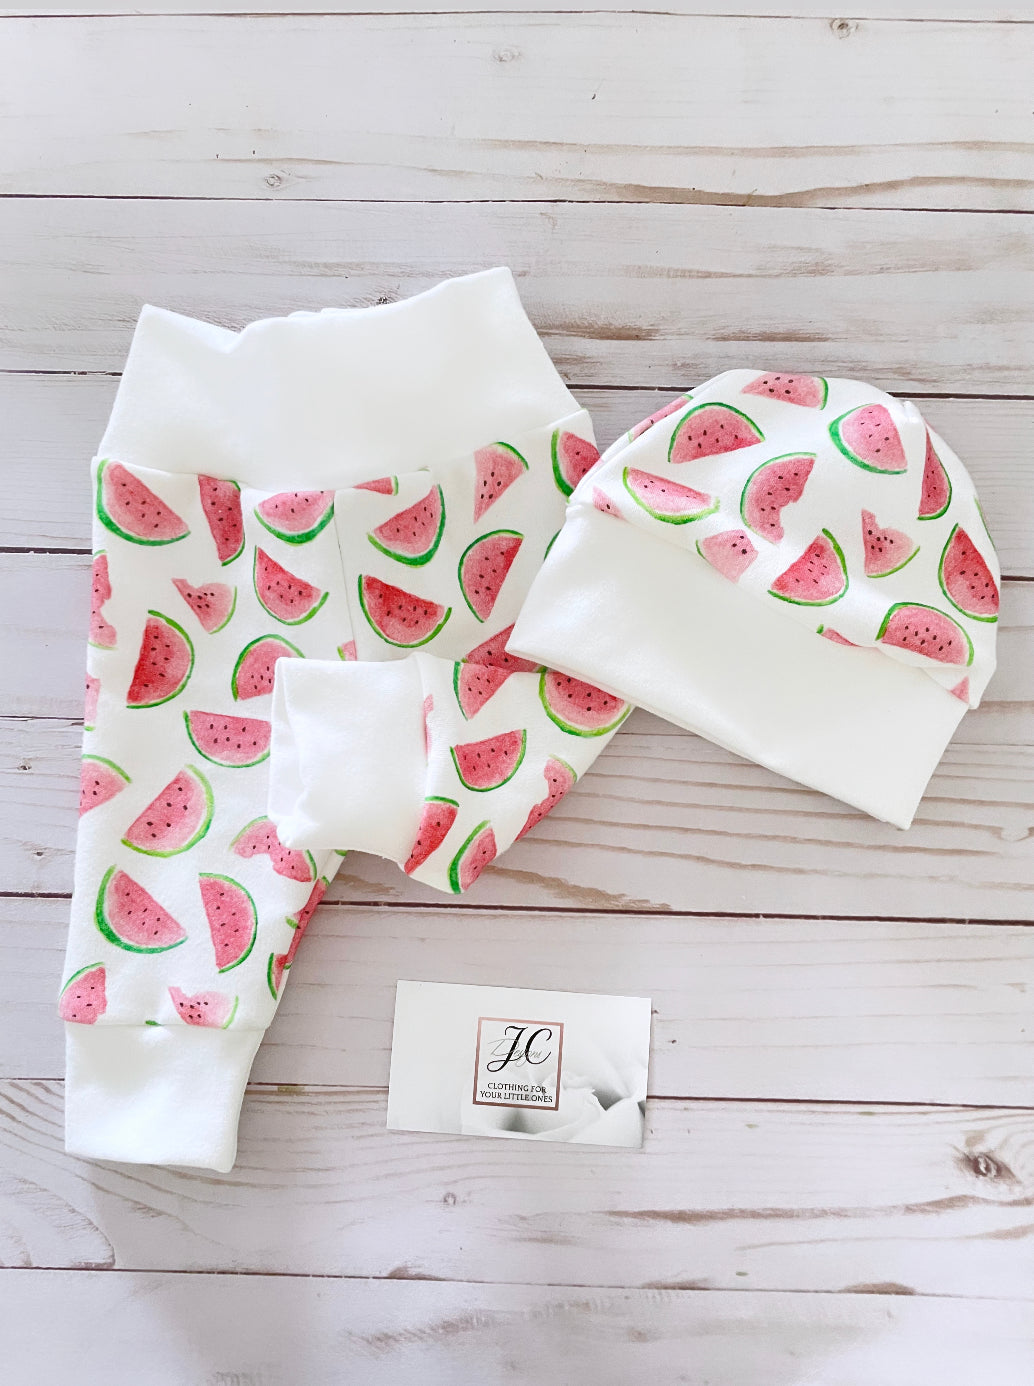 Watermelon outfit